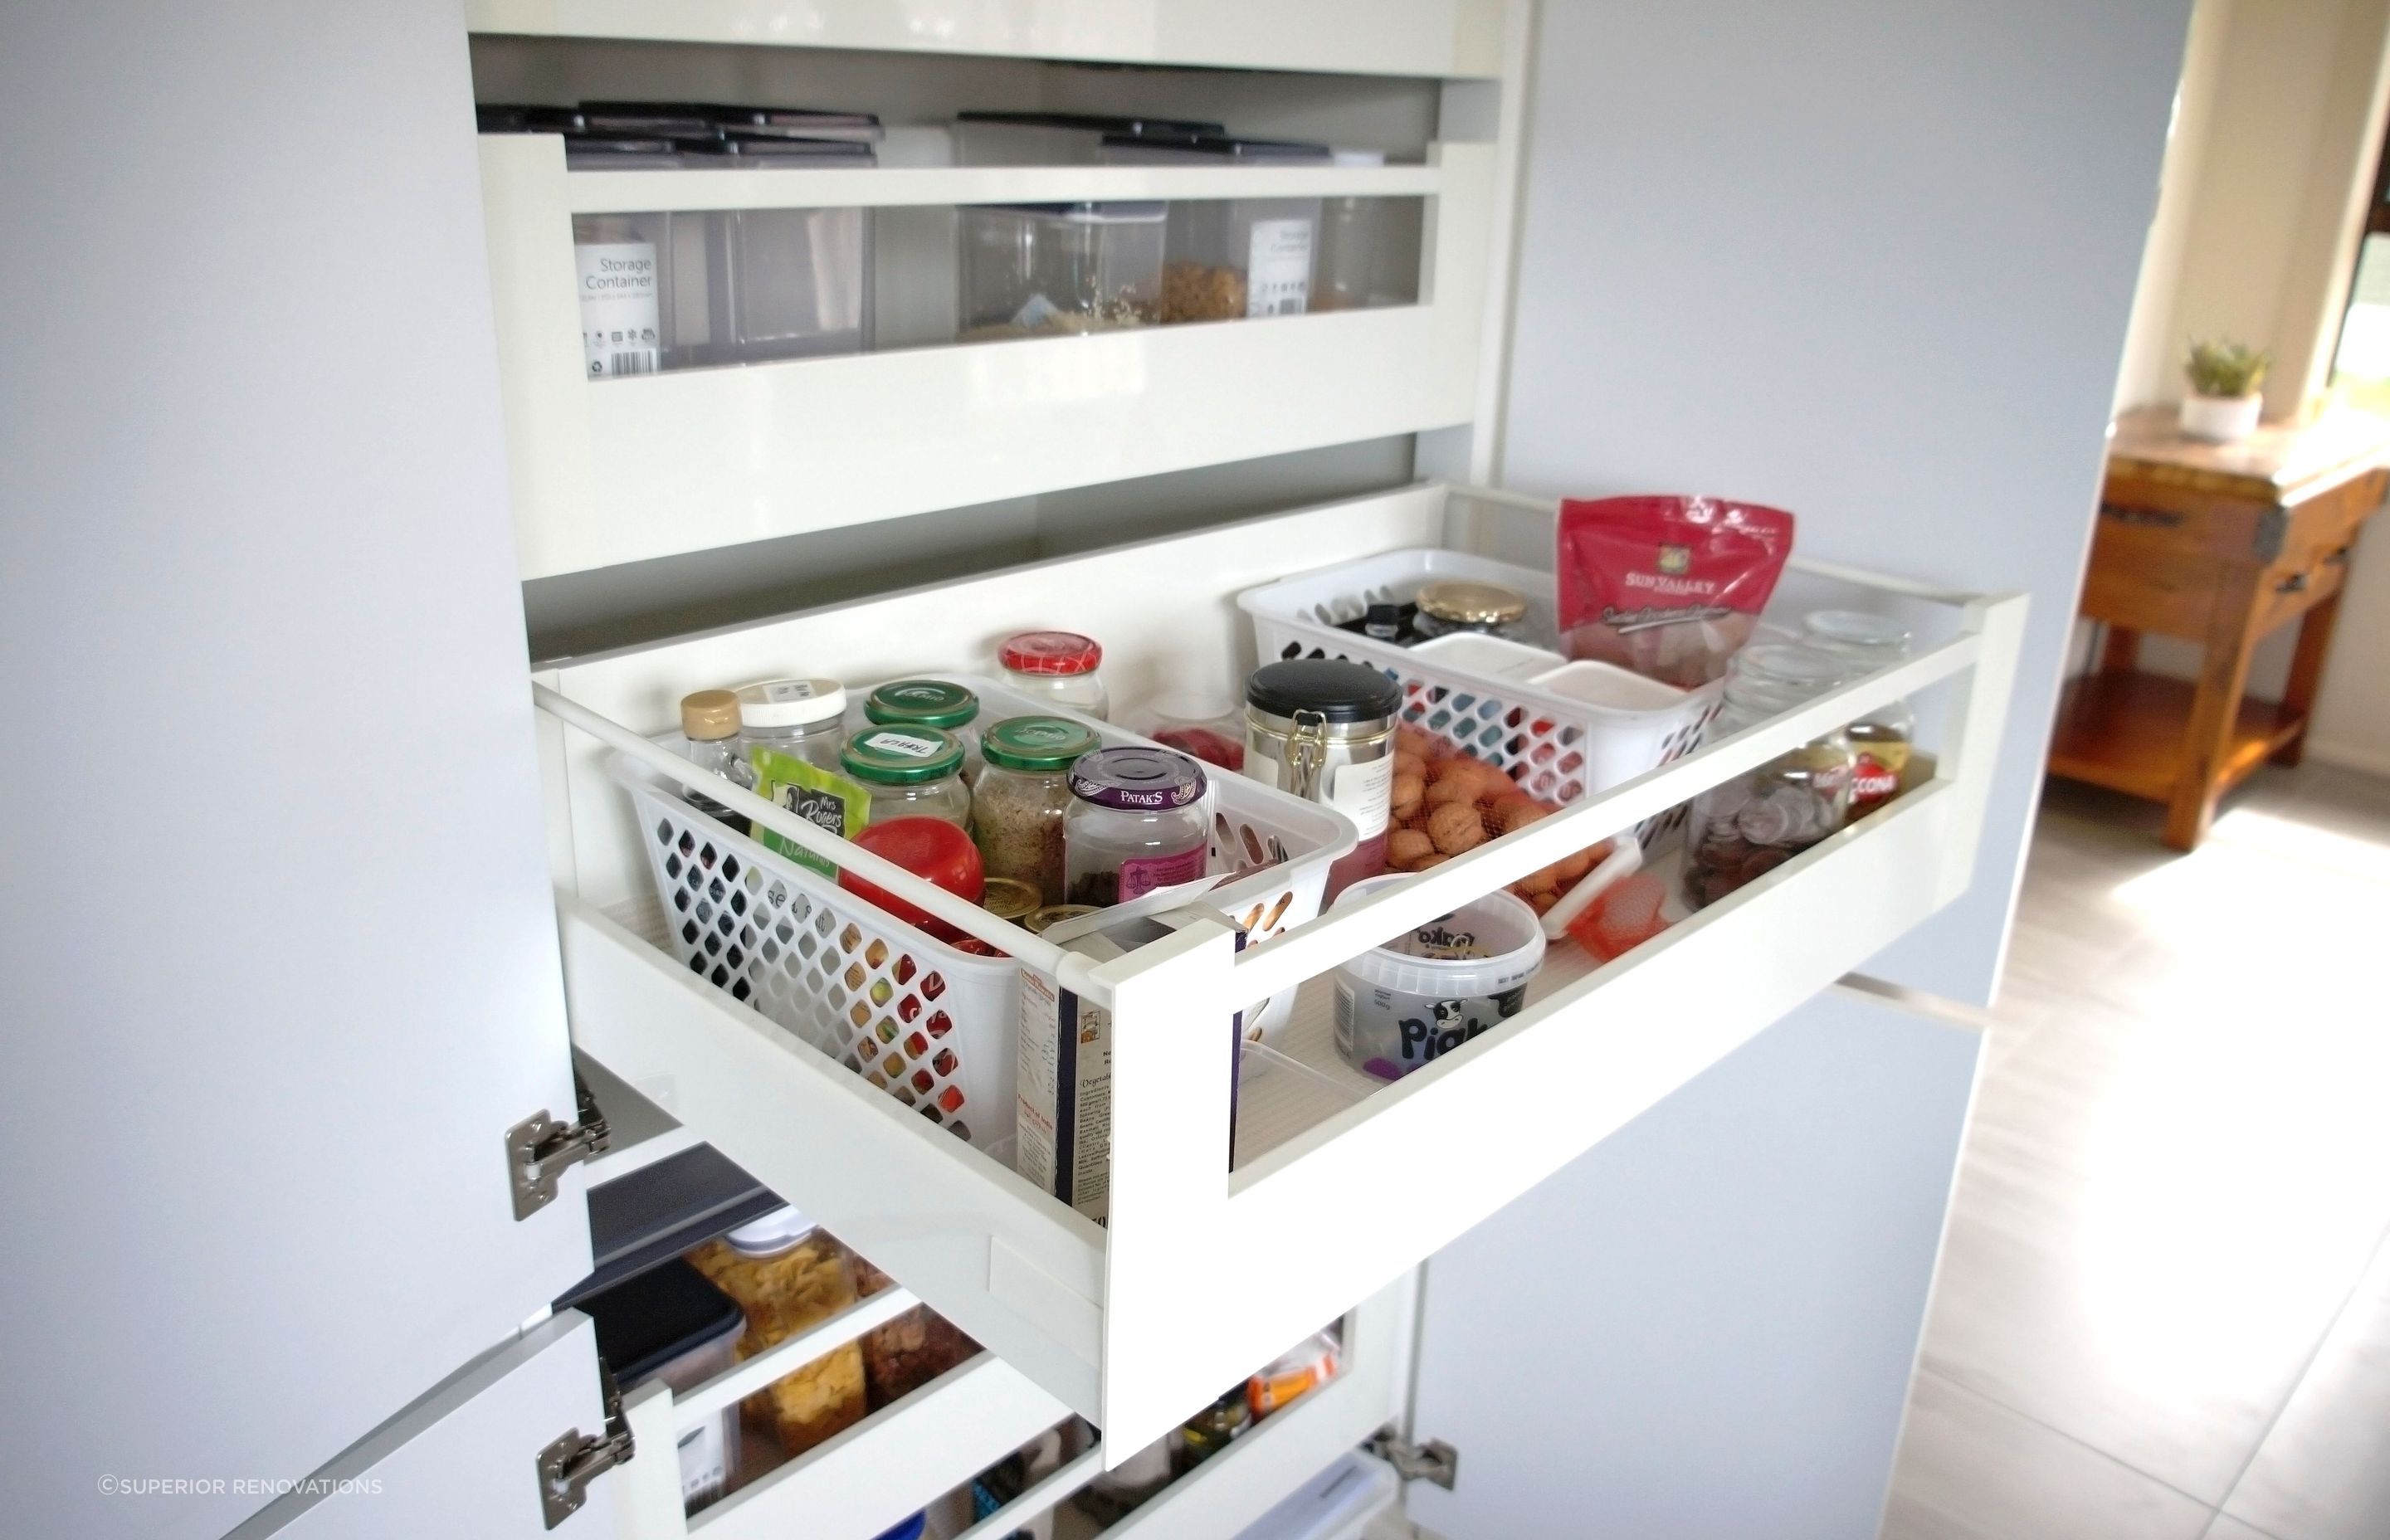 In this pantry, instead of building an entire pull out pantry, we instead created individual drawers that can be pulled out.